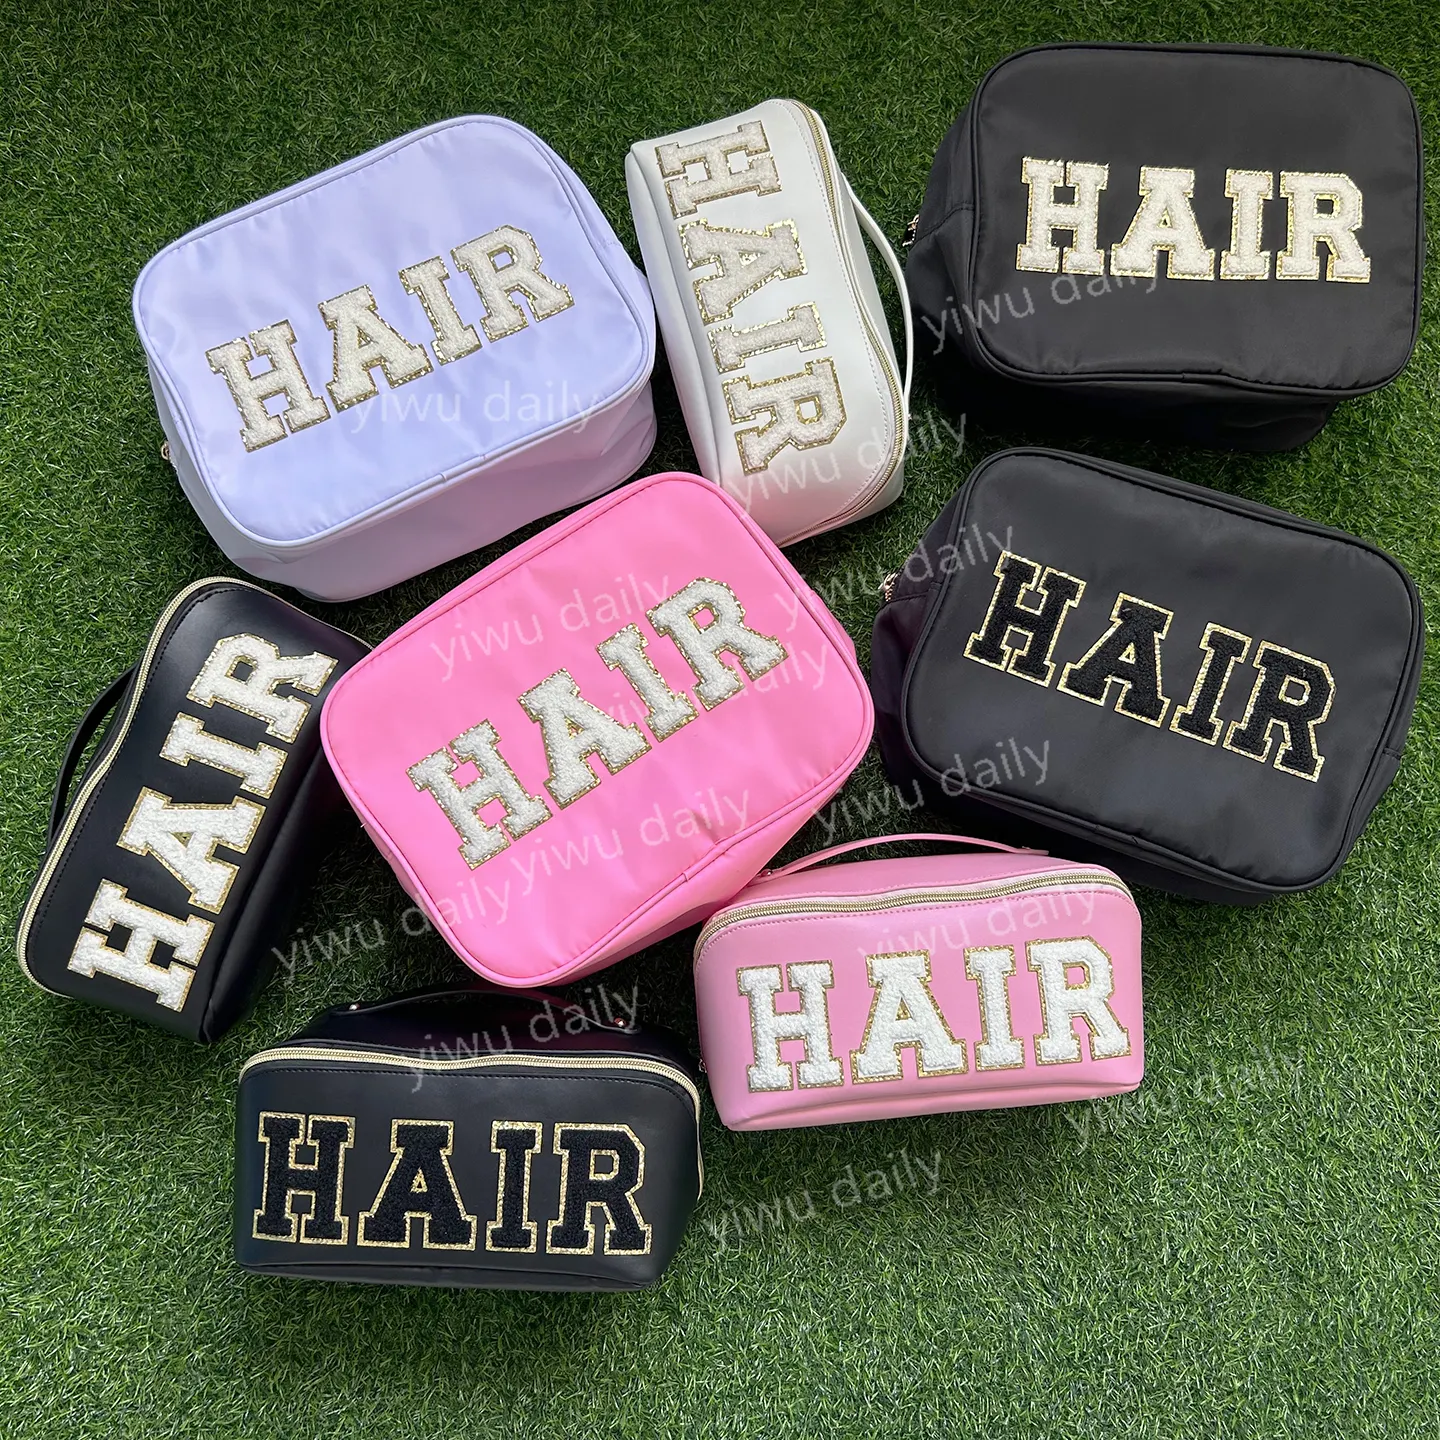 High Quality Nylon Pouch Embroidery Chenille Patches Personalize DIY Custom Women Girls Custom Bridesmaid Gifts Makeup Bag